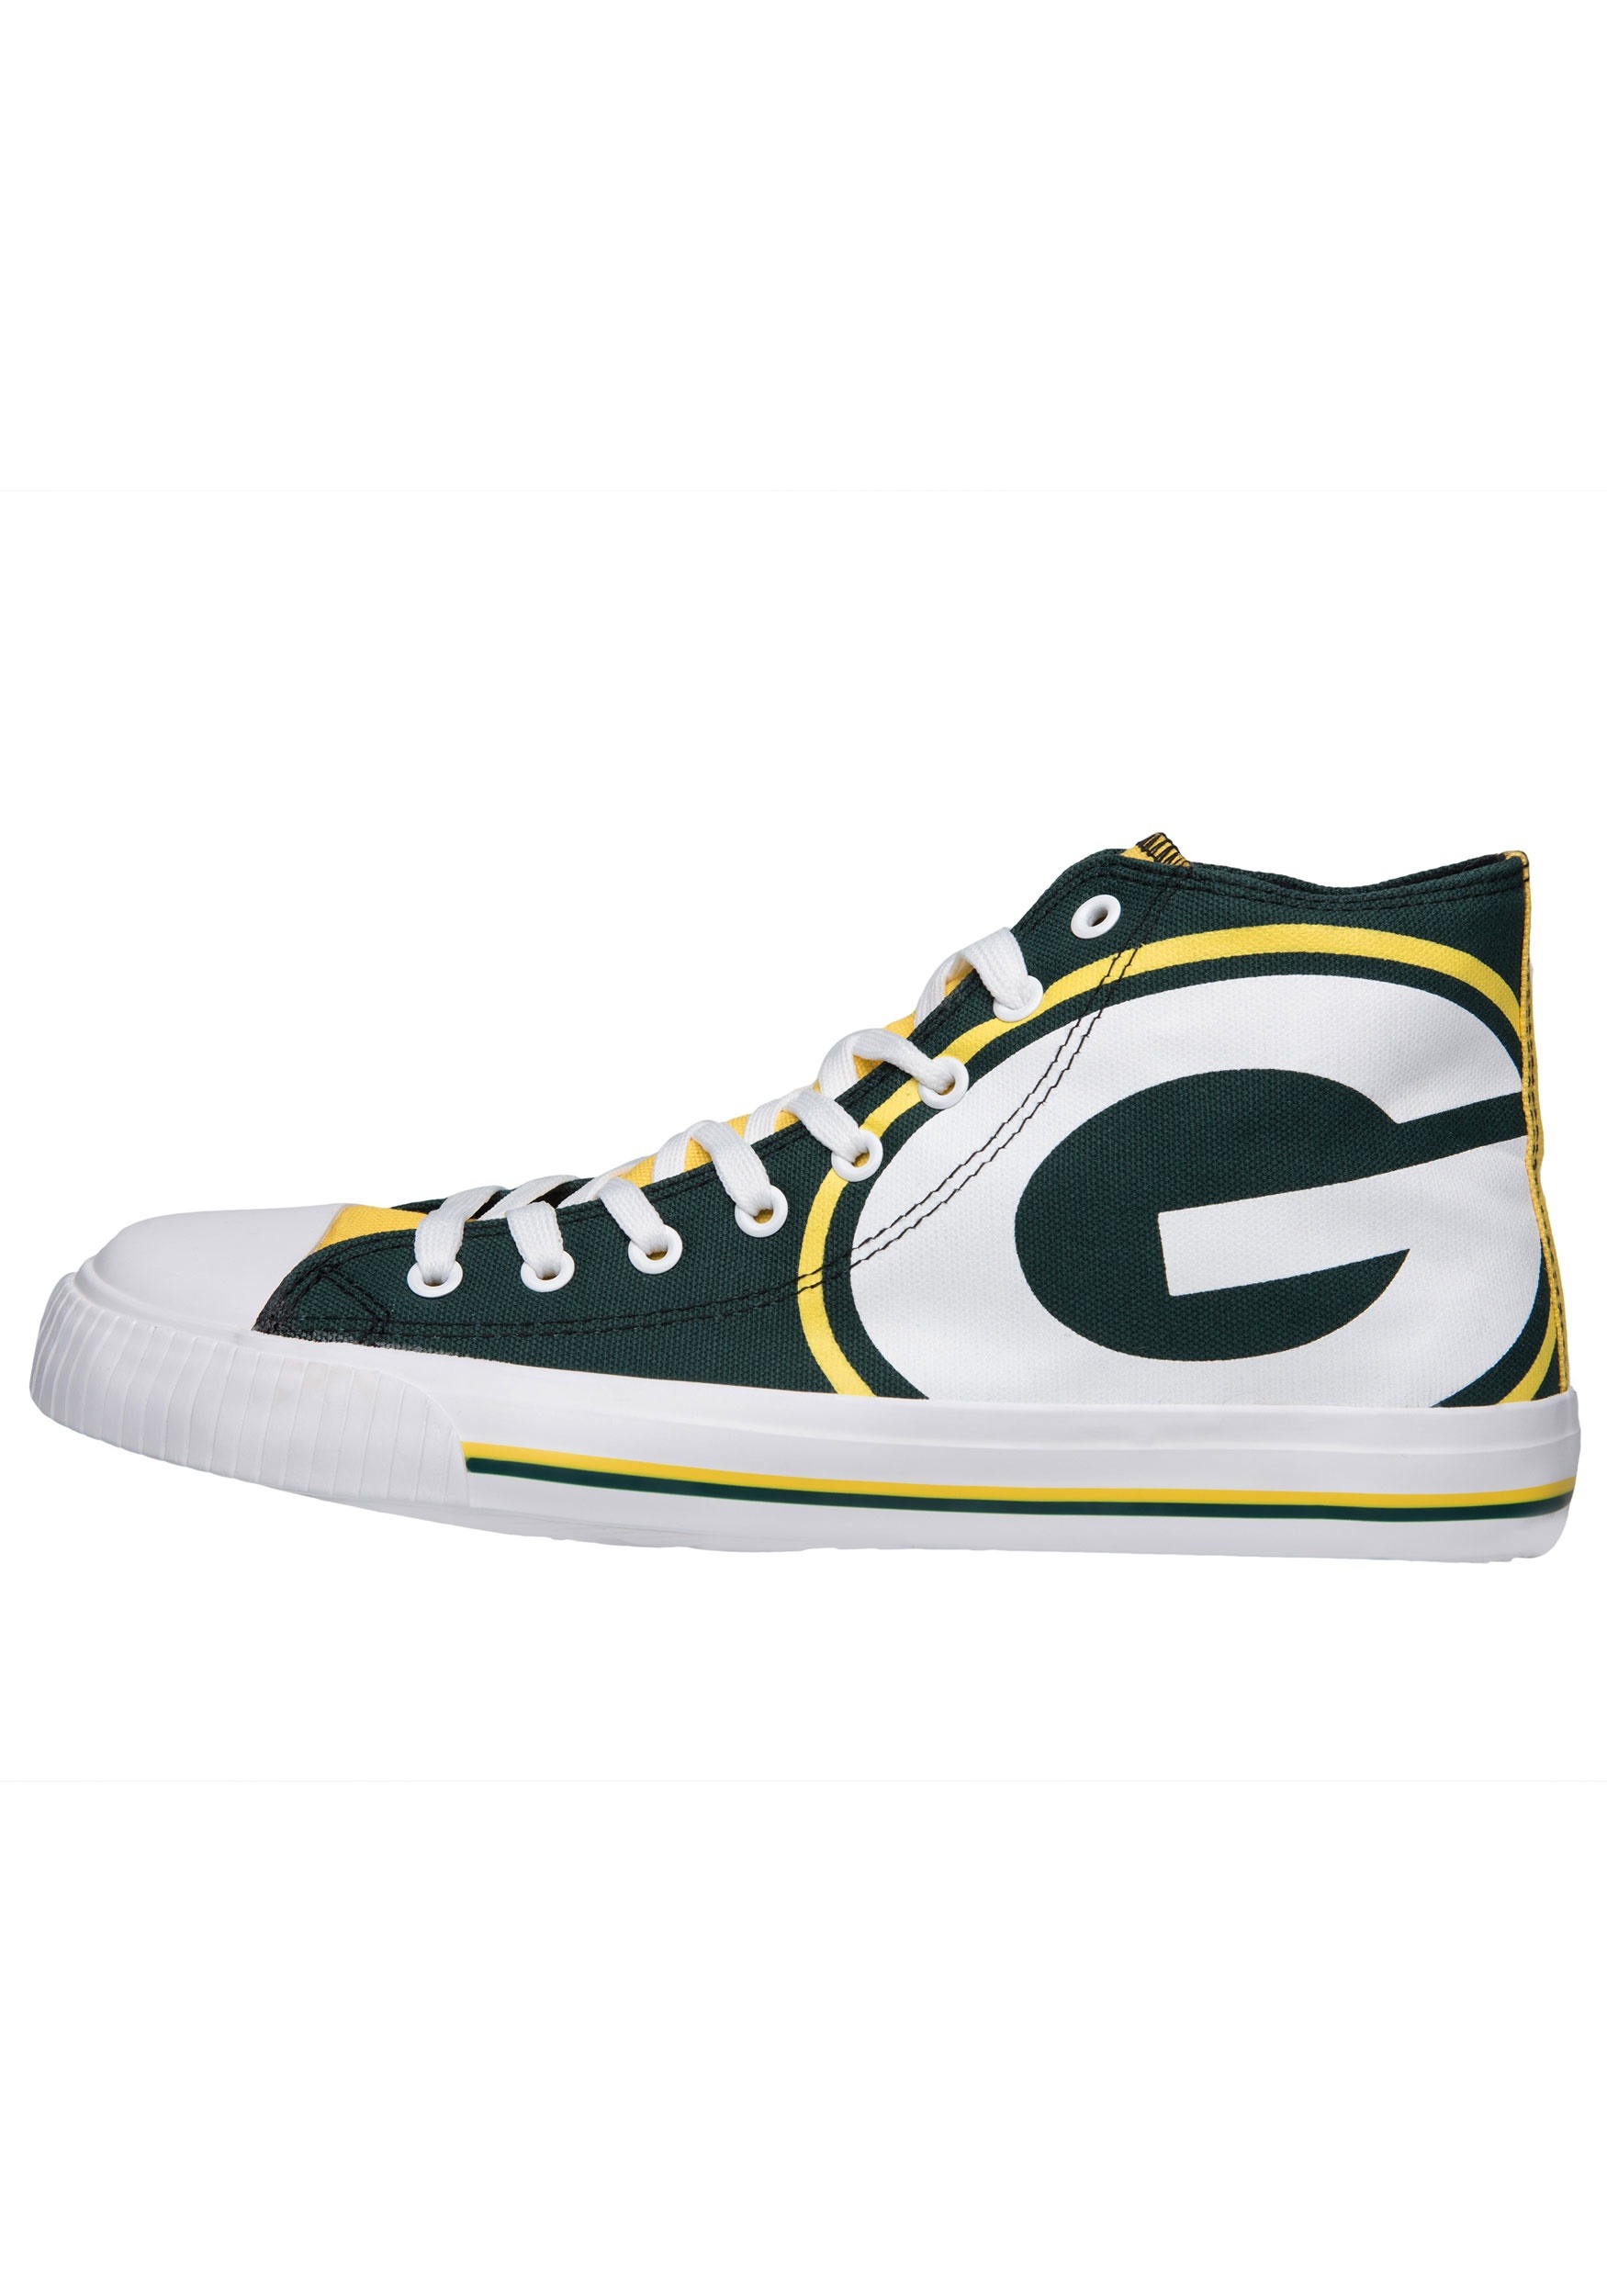 Green Bay Packers High Top Big Logo Canvas Shoes for Men